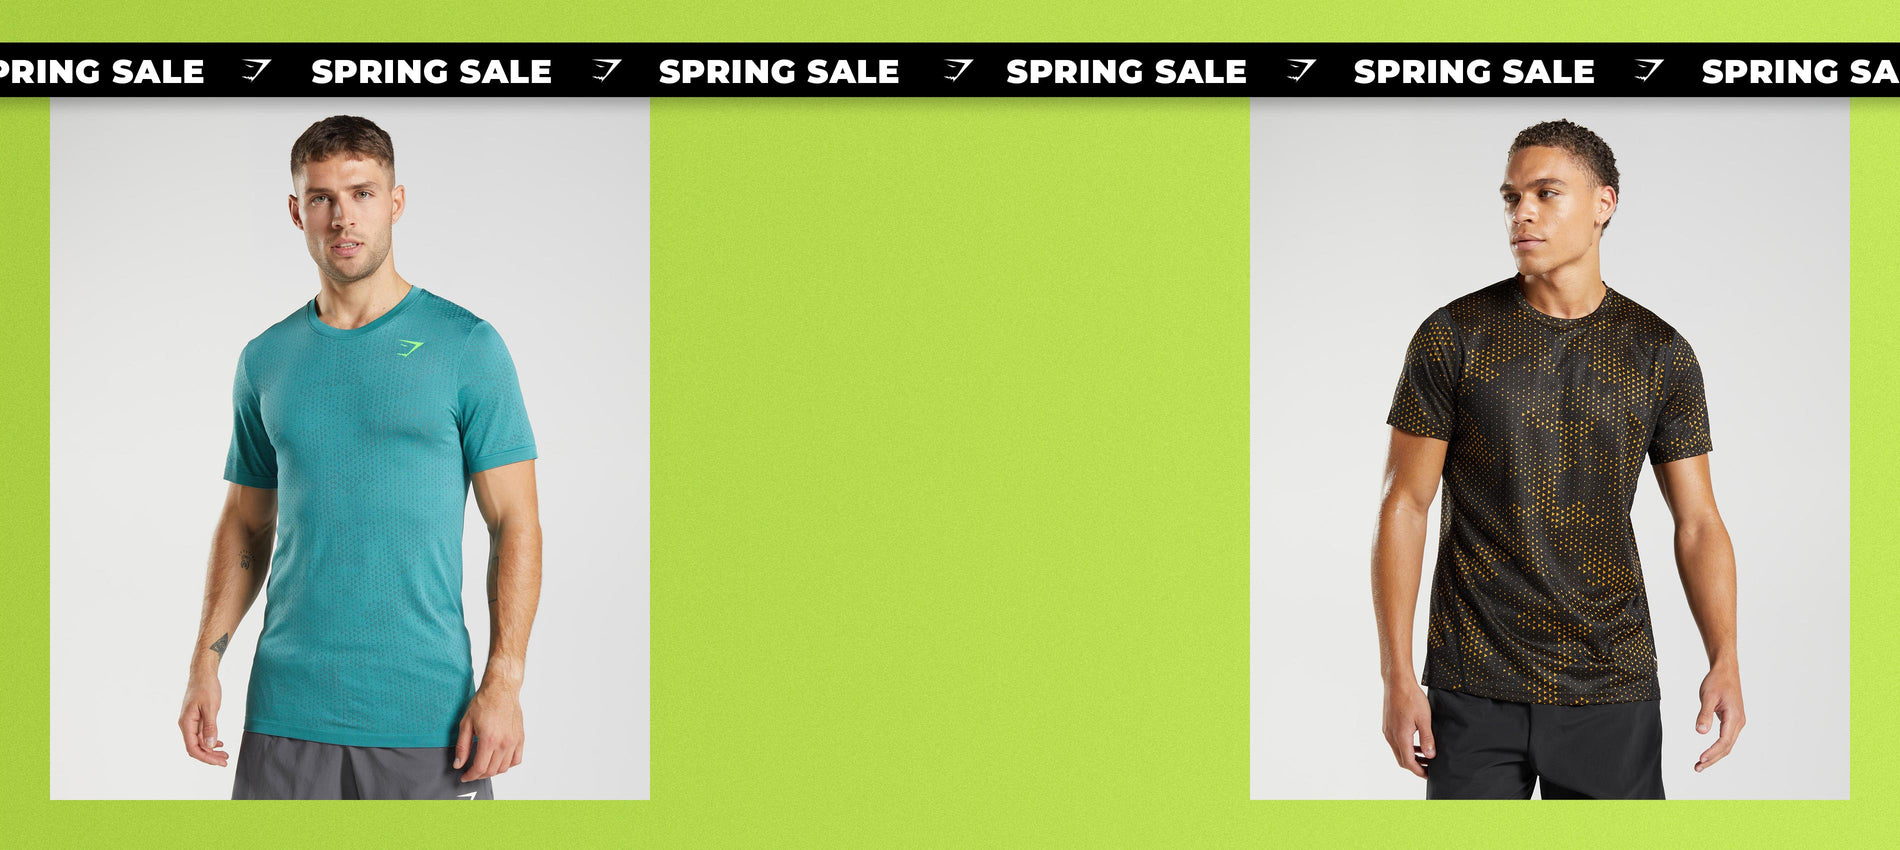 Sale Banners with a green background. 